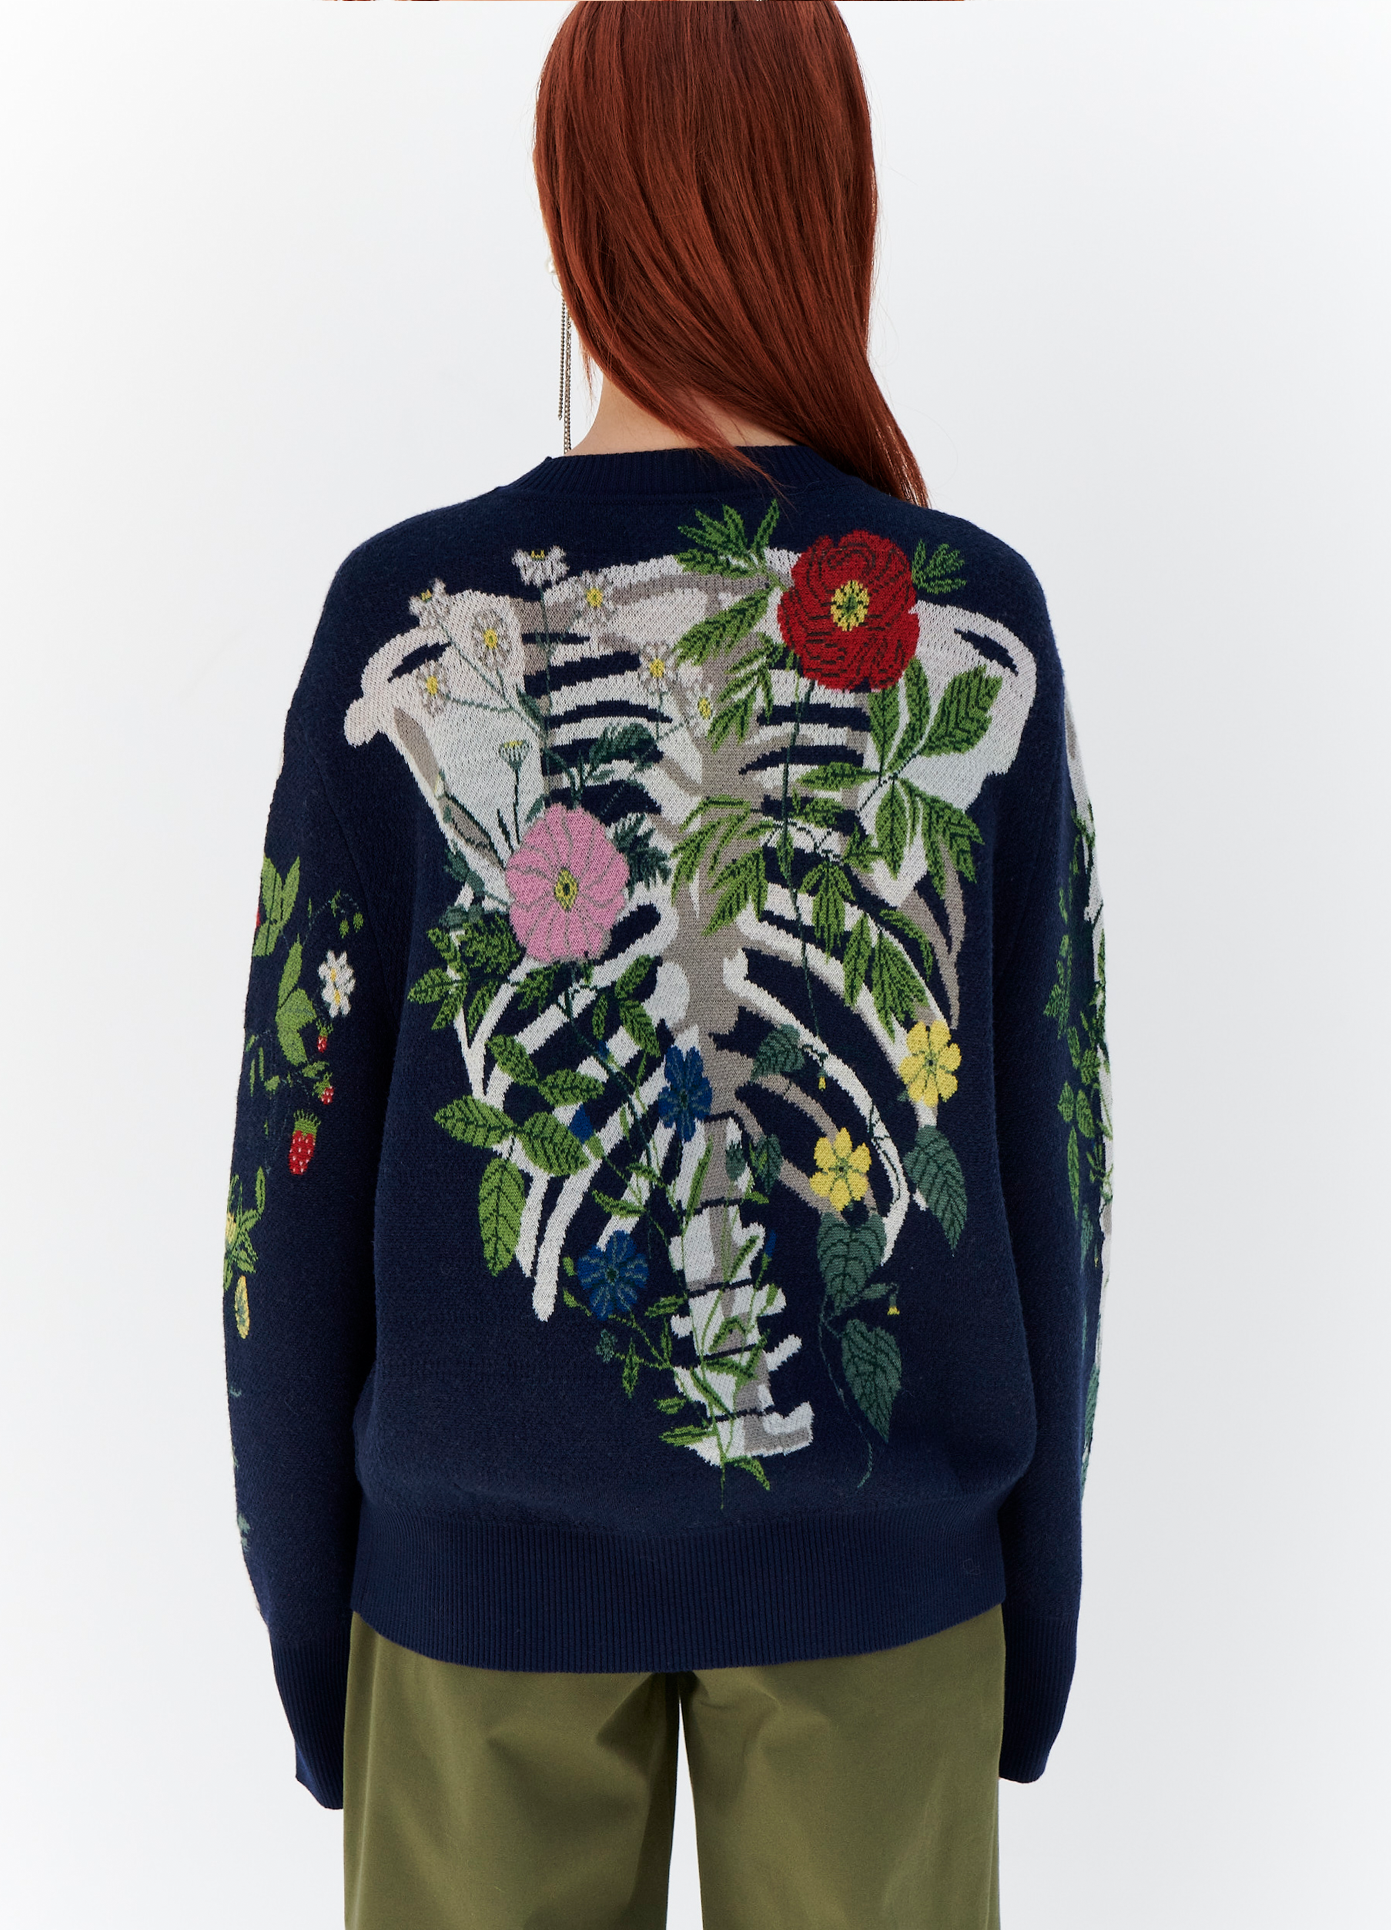 MONSE Floral Skeleton Sweater in Navy on model back view